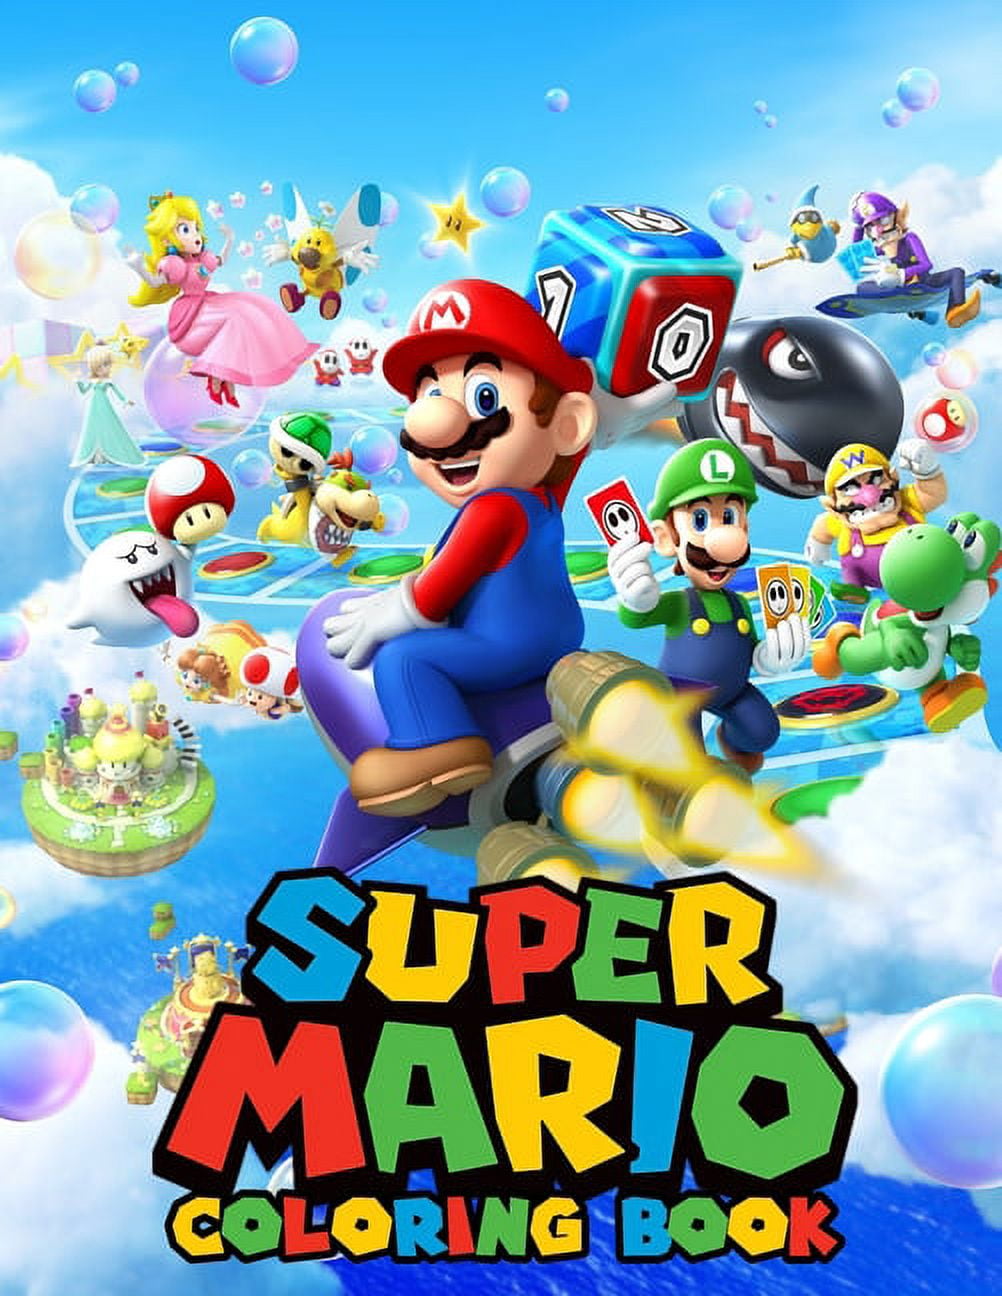 Super mario coloring book a coloring book for kids and adults with super mario pictures relax and stress relief paperback